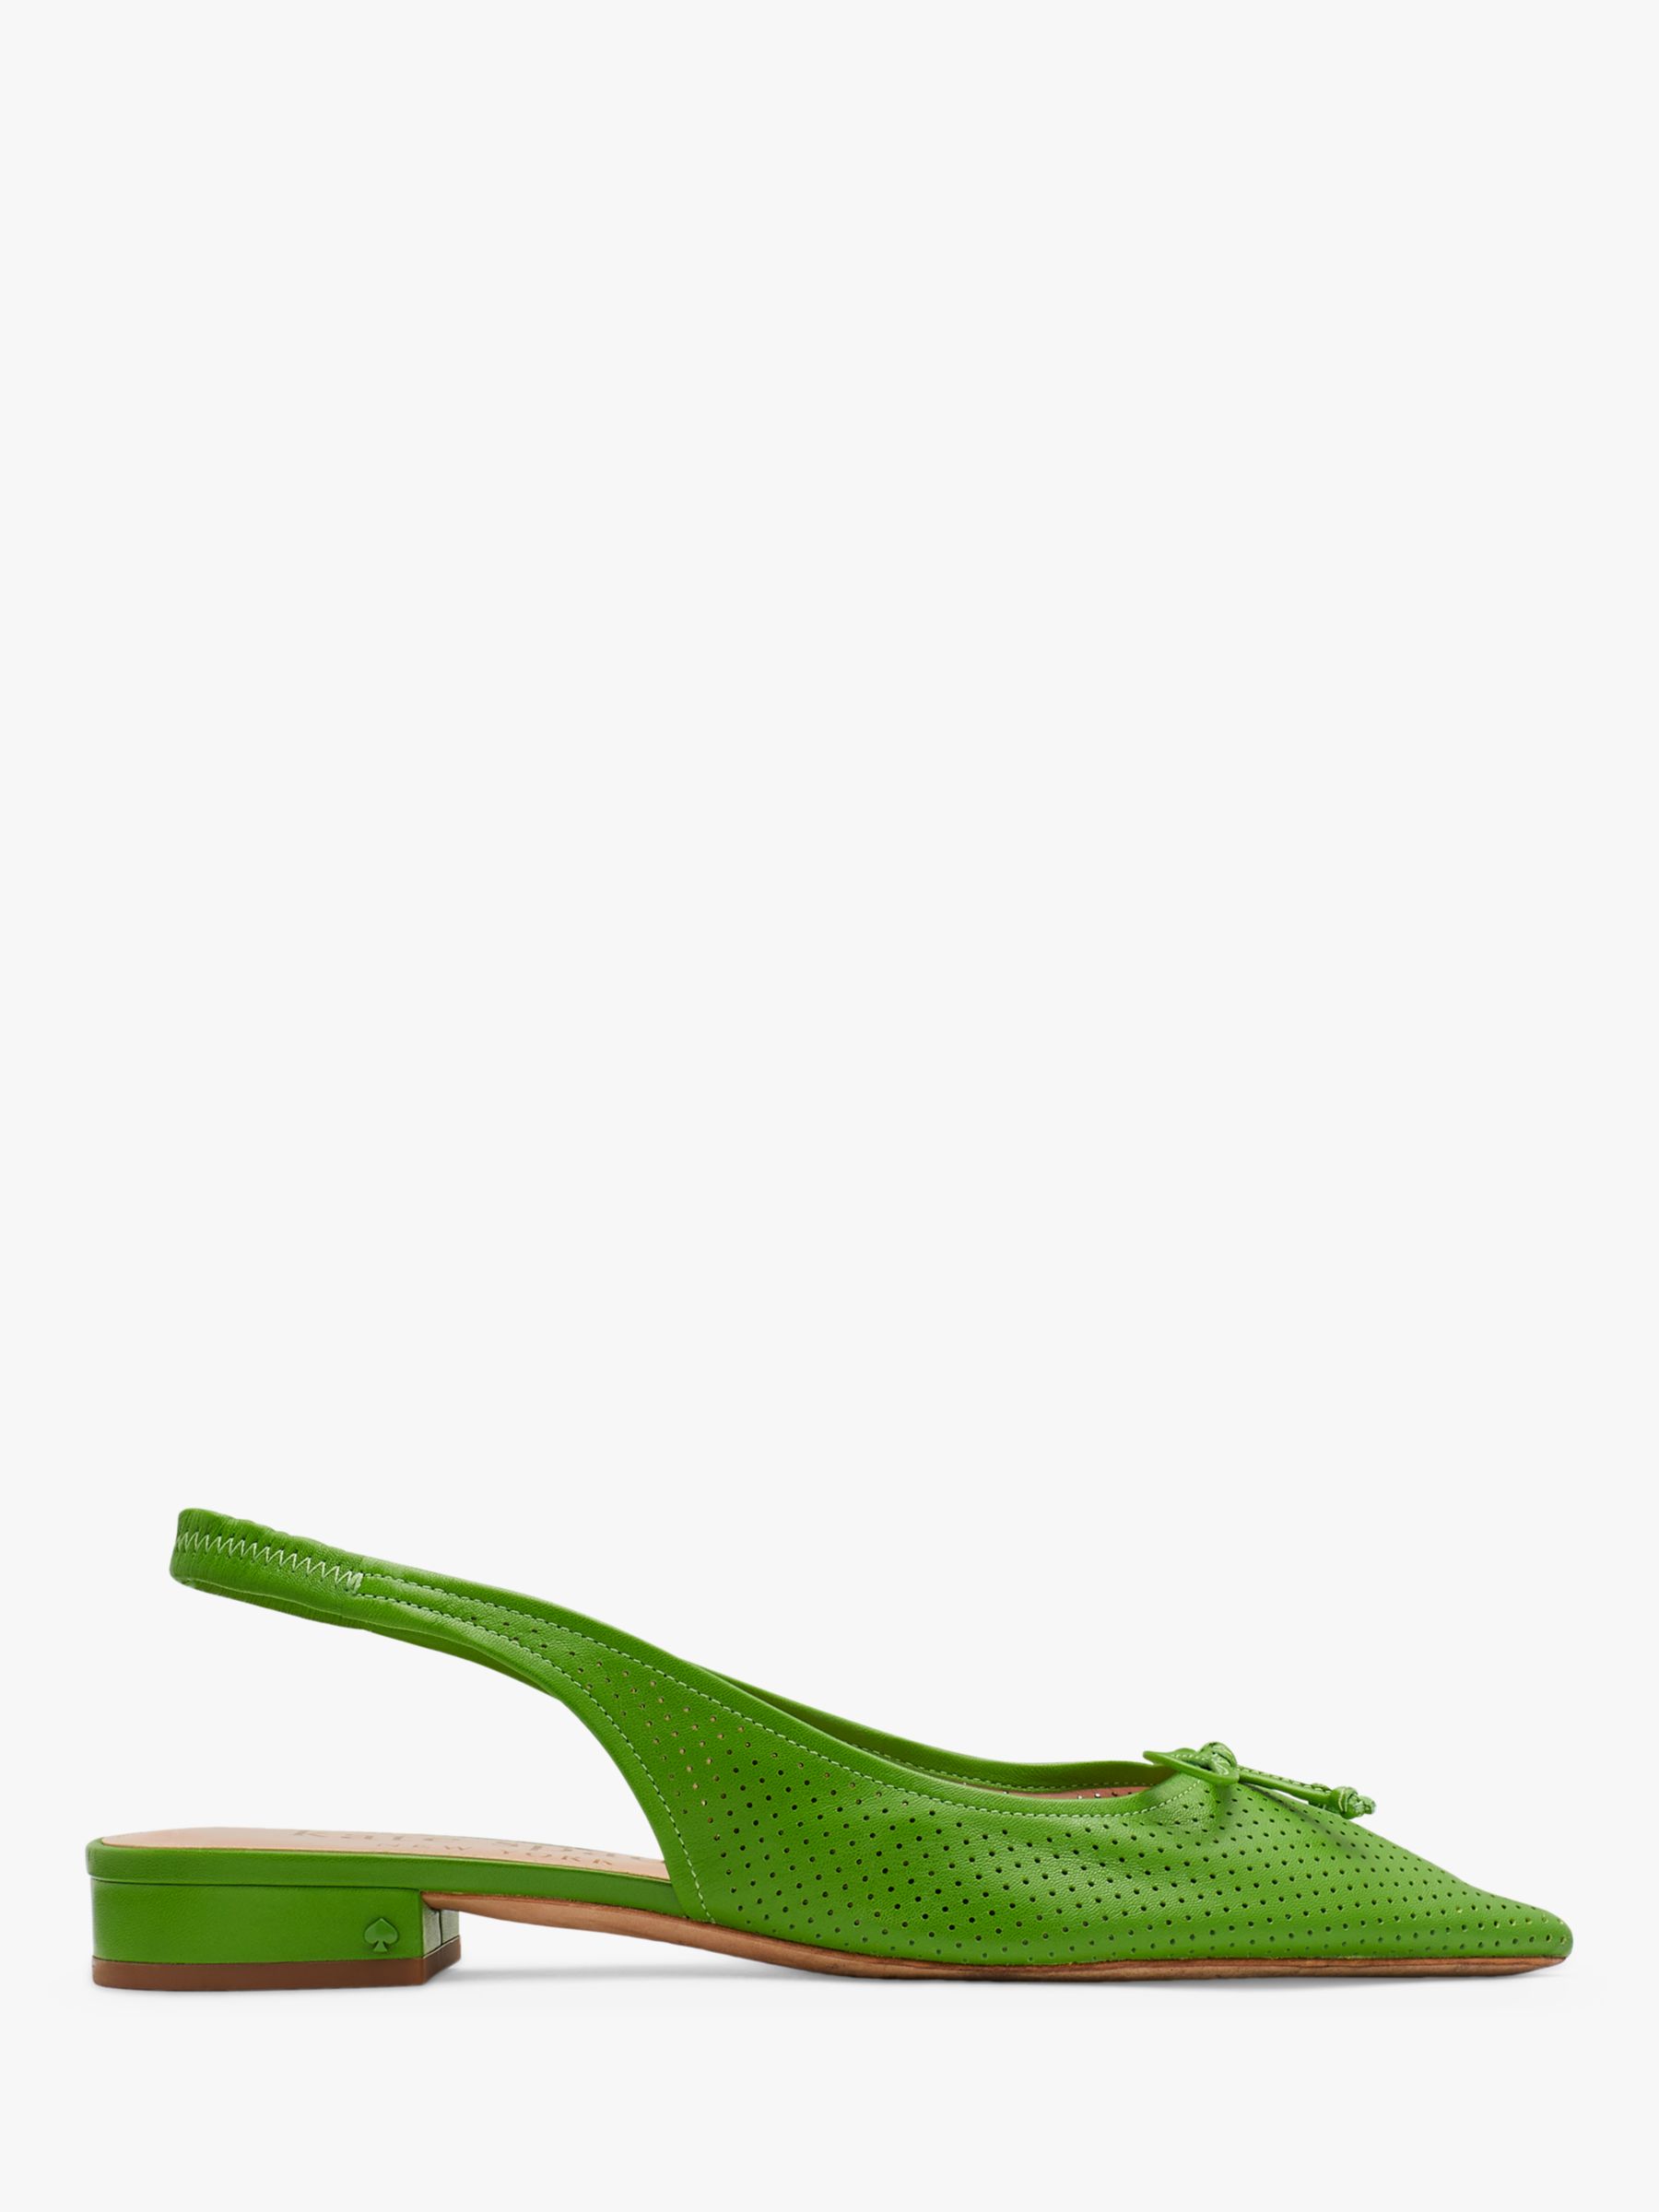 kate spade new york Veronica Perforated Leather Pointed Pumps, Green at ...